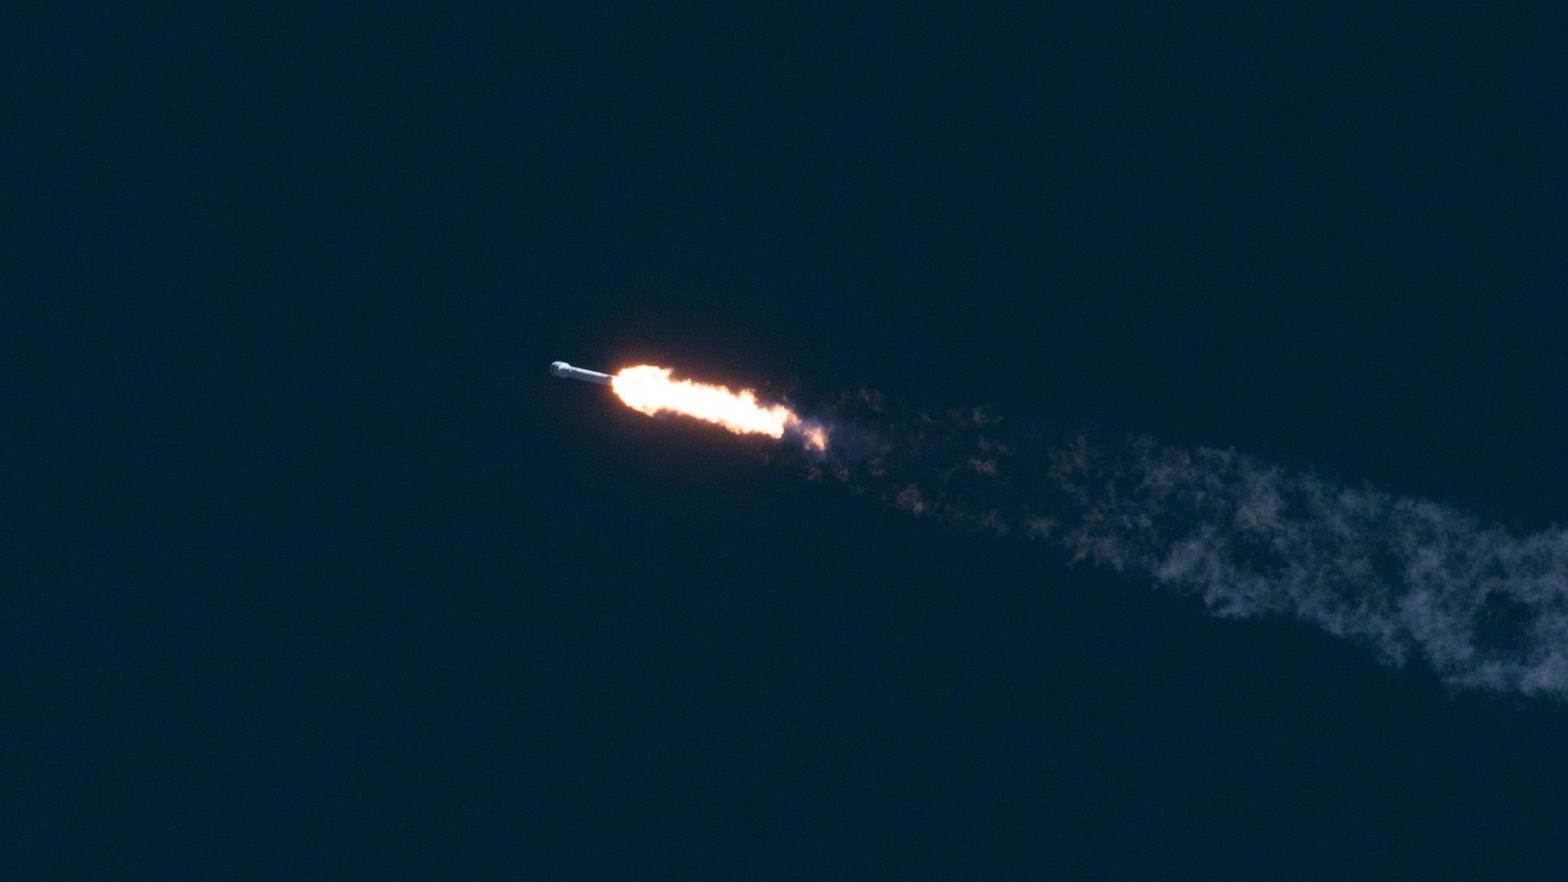 The SpaceX Falcon 9 rocket during launch on February 11, 2015. (Photo: SpaceX)